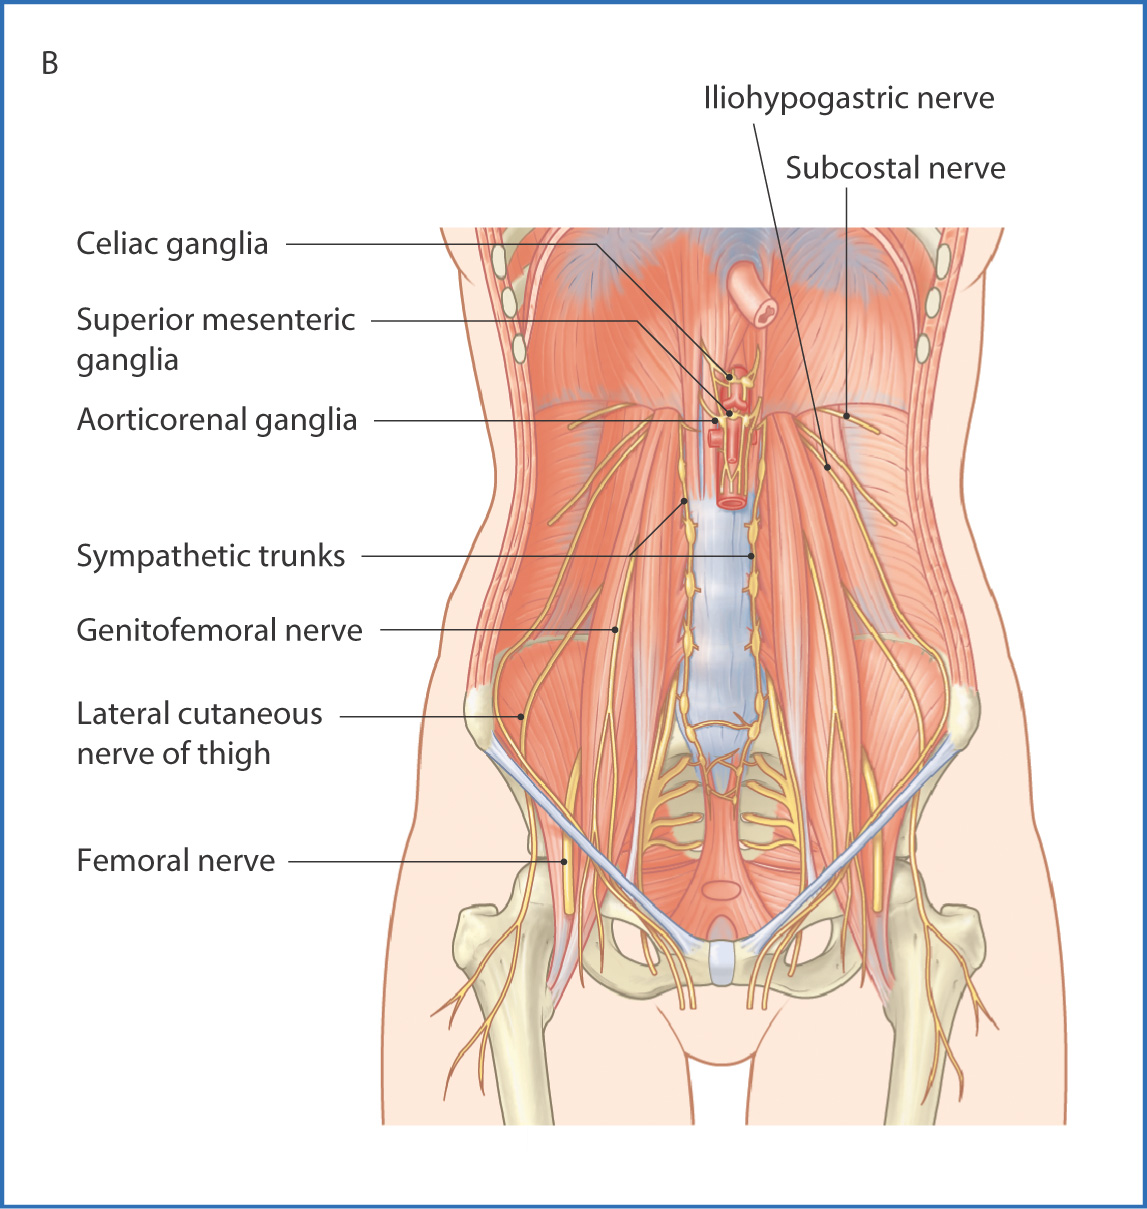 Anatomy of the muscles and nerves of the posterior abdominal wall